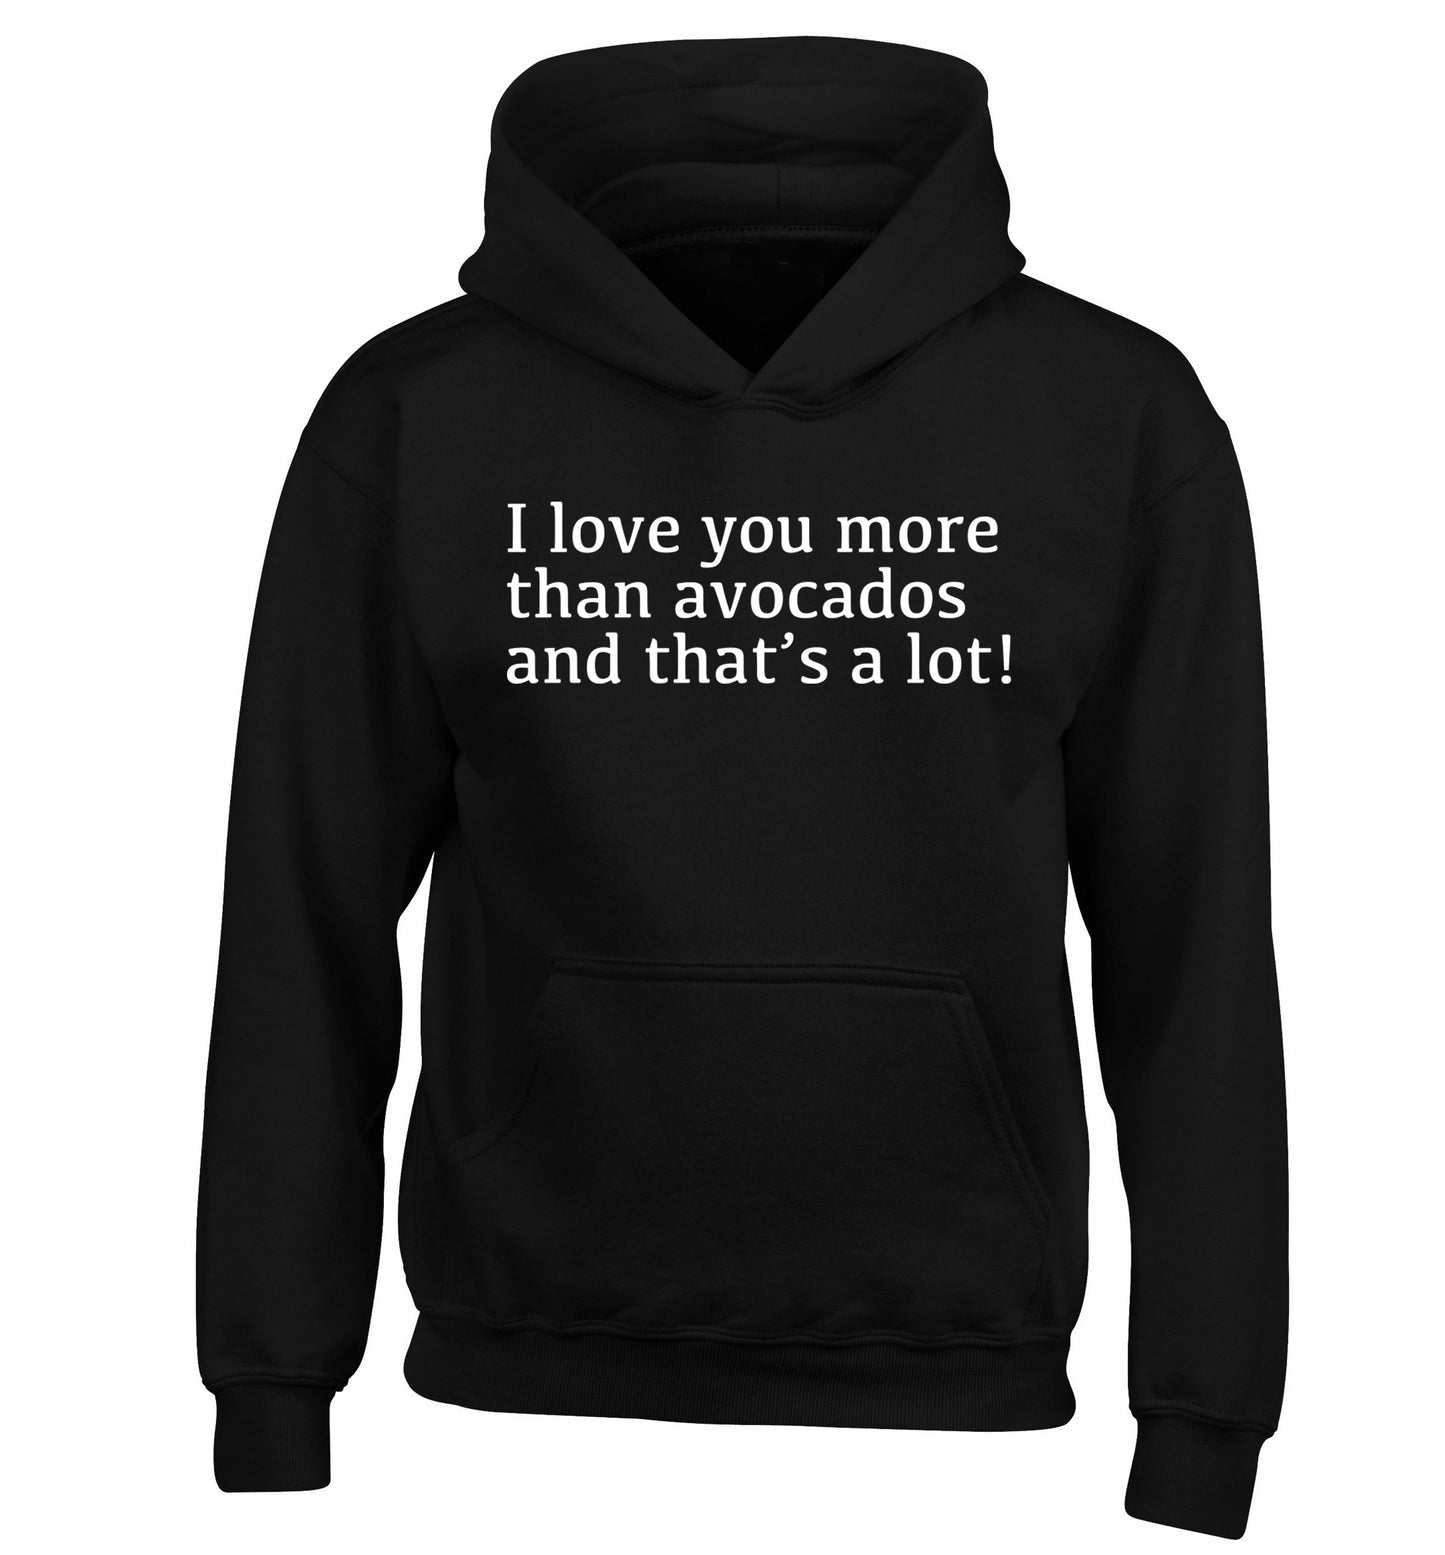 I love you more than avocados and that's a lot children's black hoodie 12-14 Years